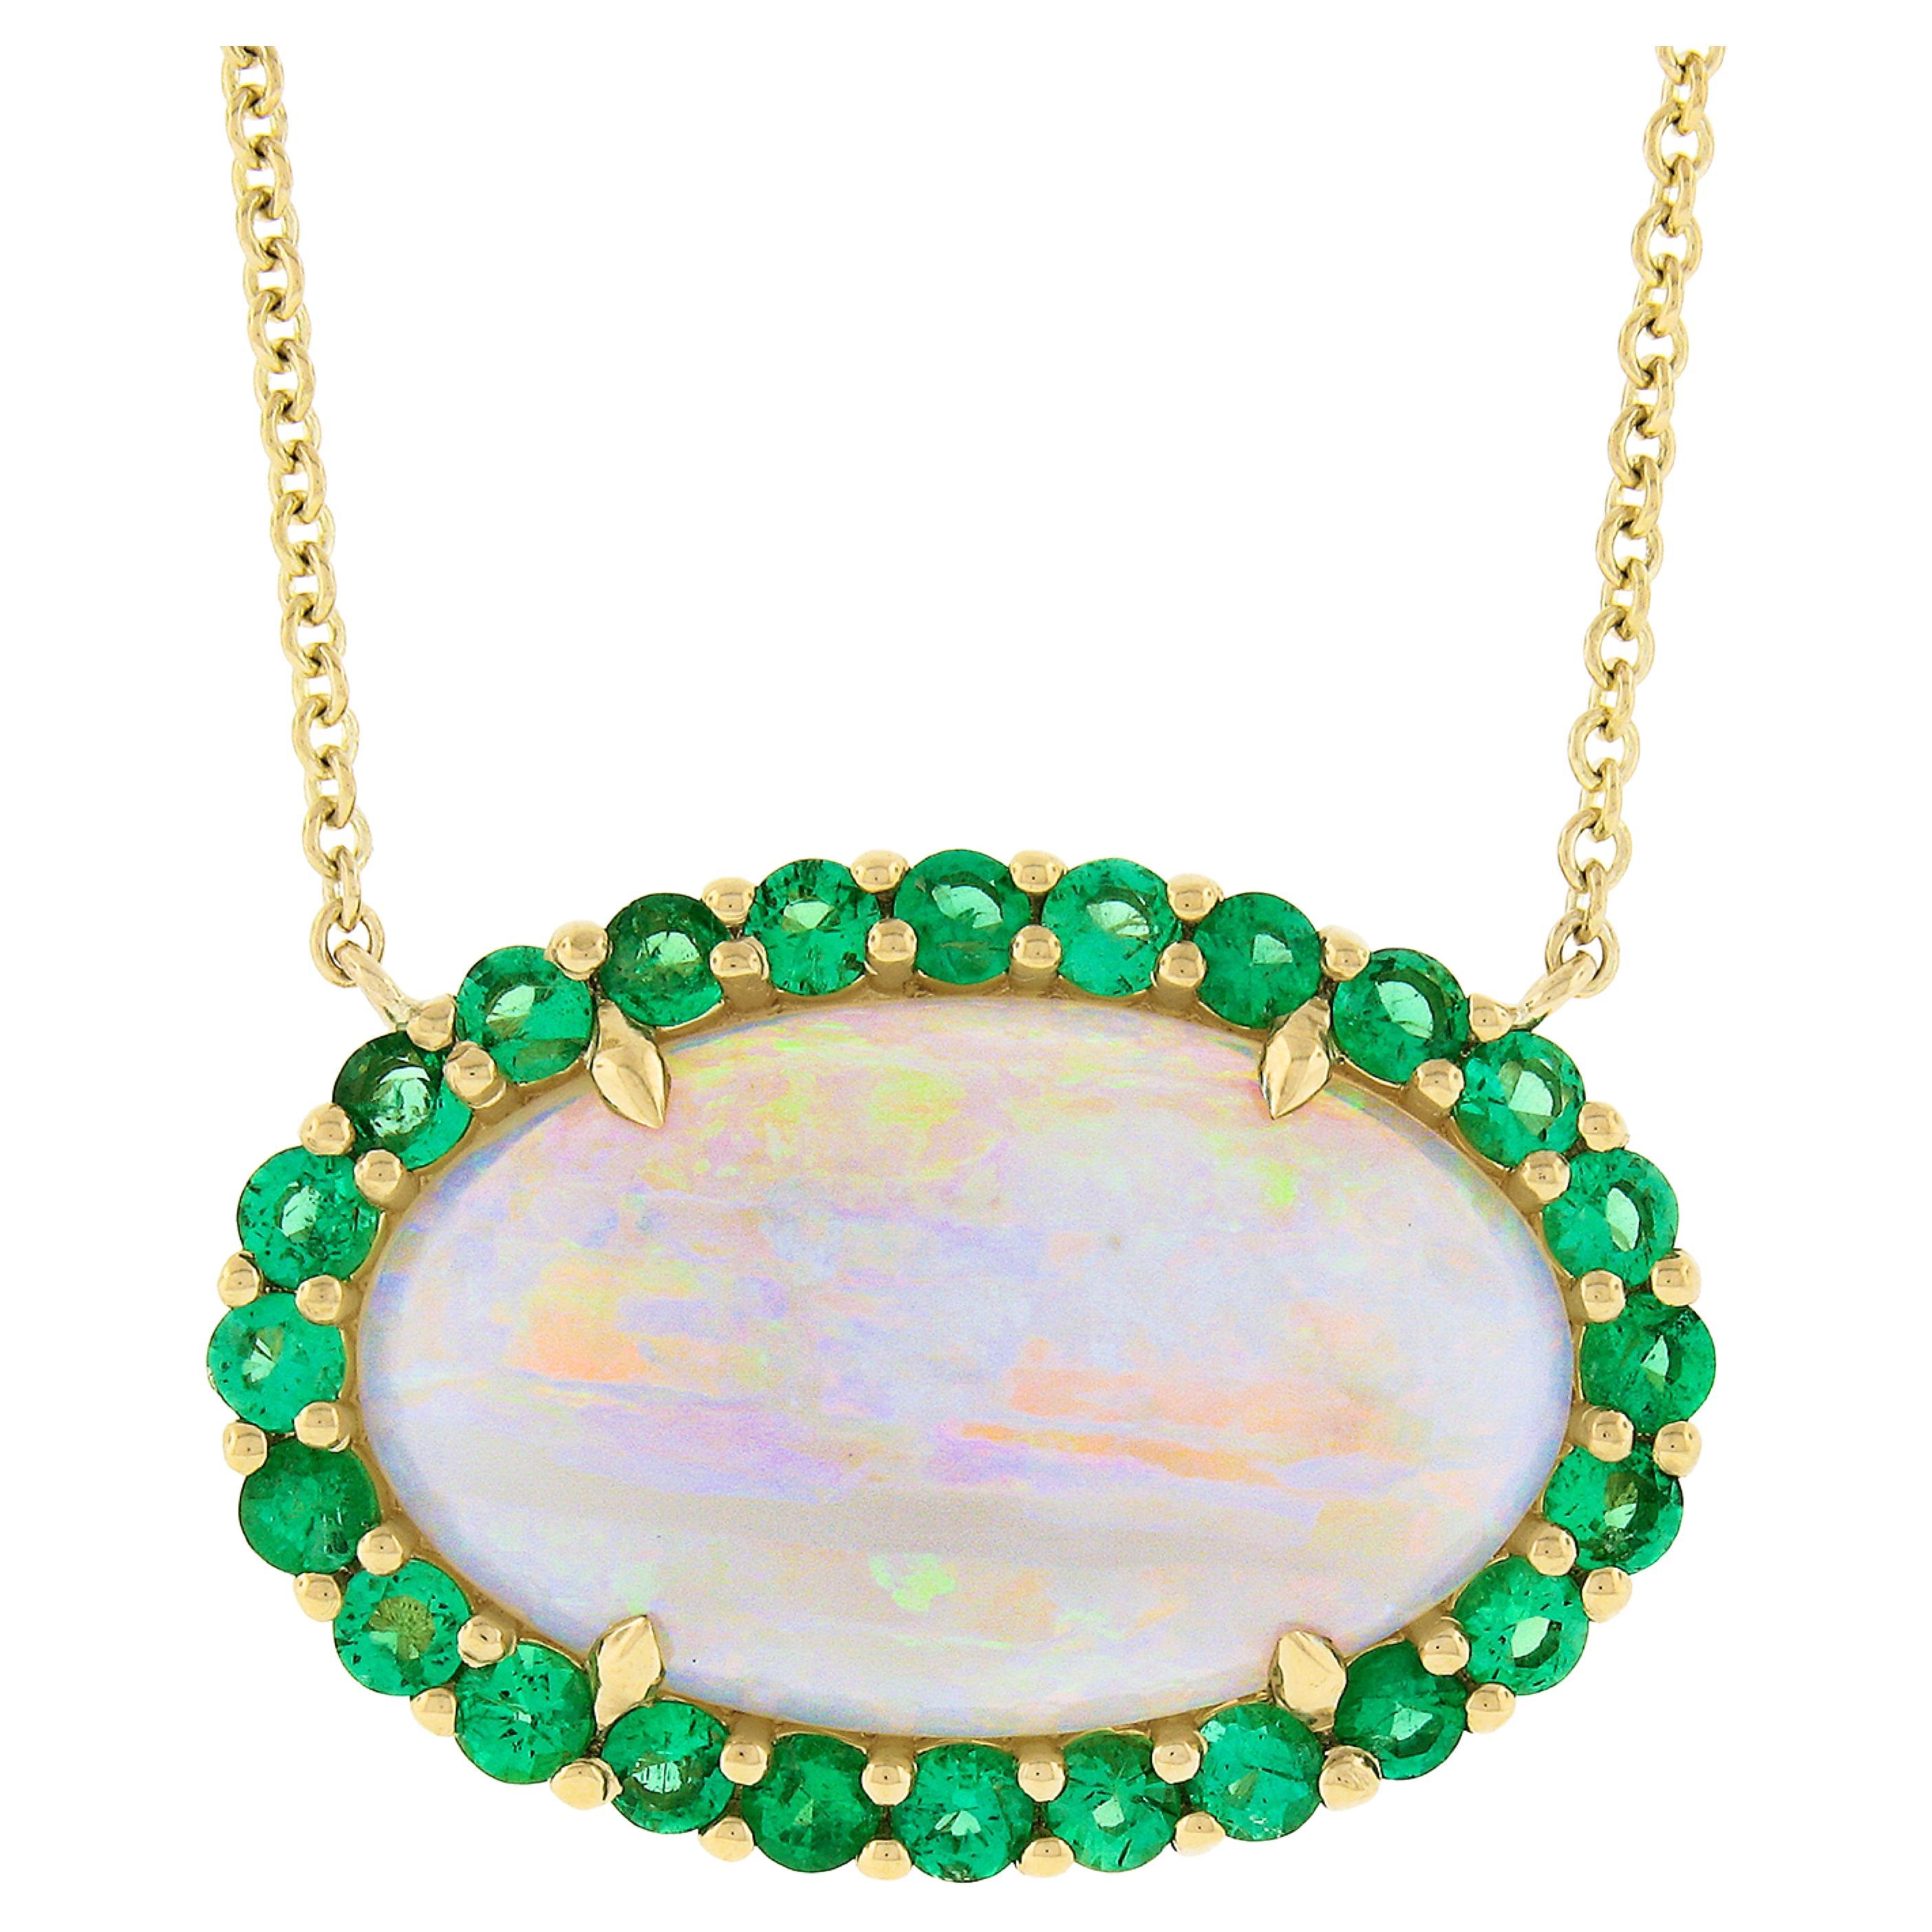 NEW 14k Gold 6.31ctw GIA Oval Cabochon Opal w/ Emerald Halo Pendant Necklace For Sale